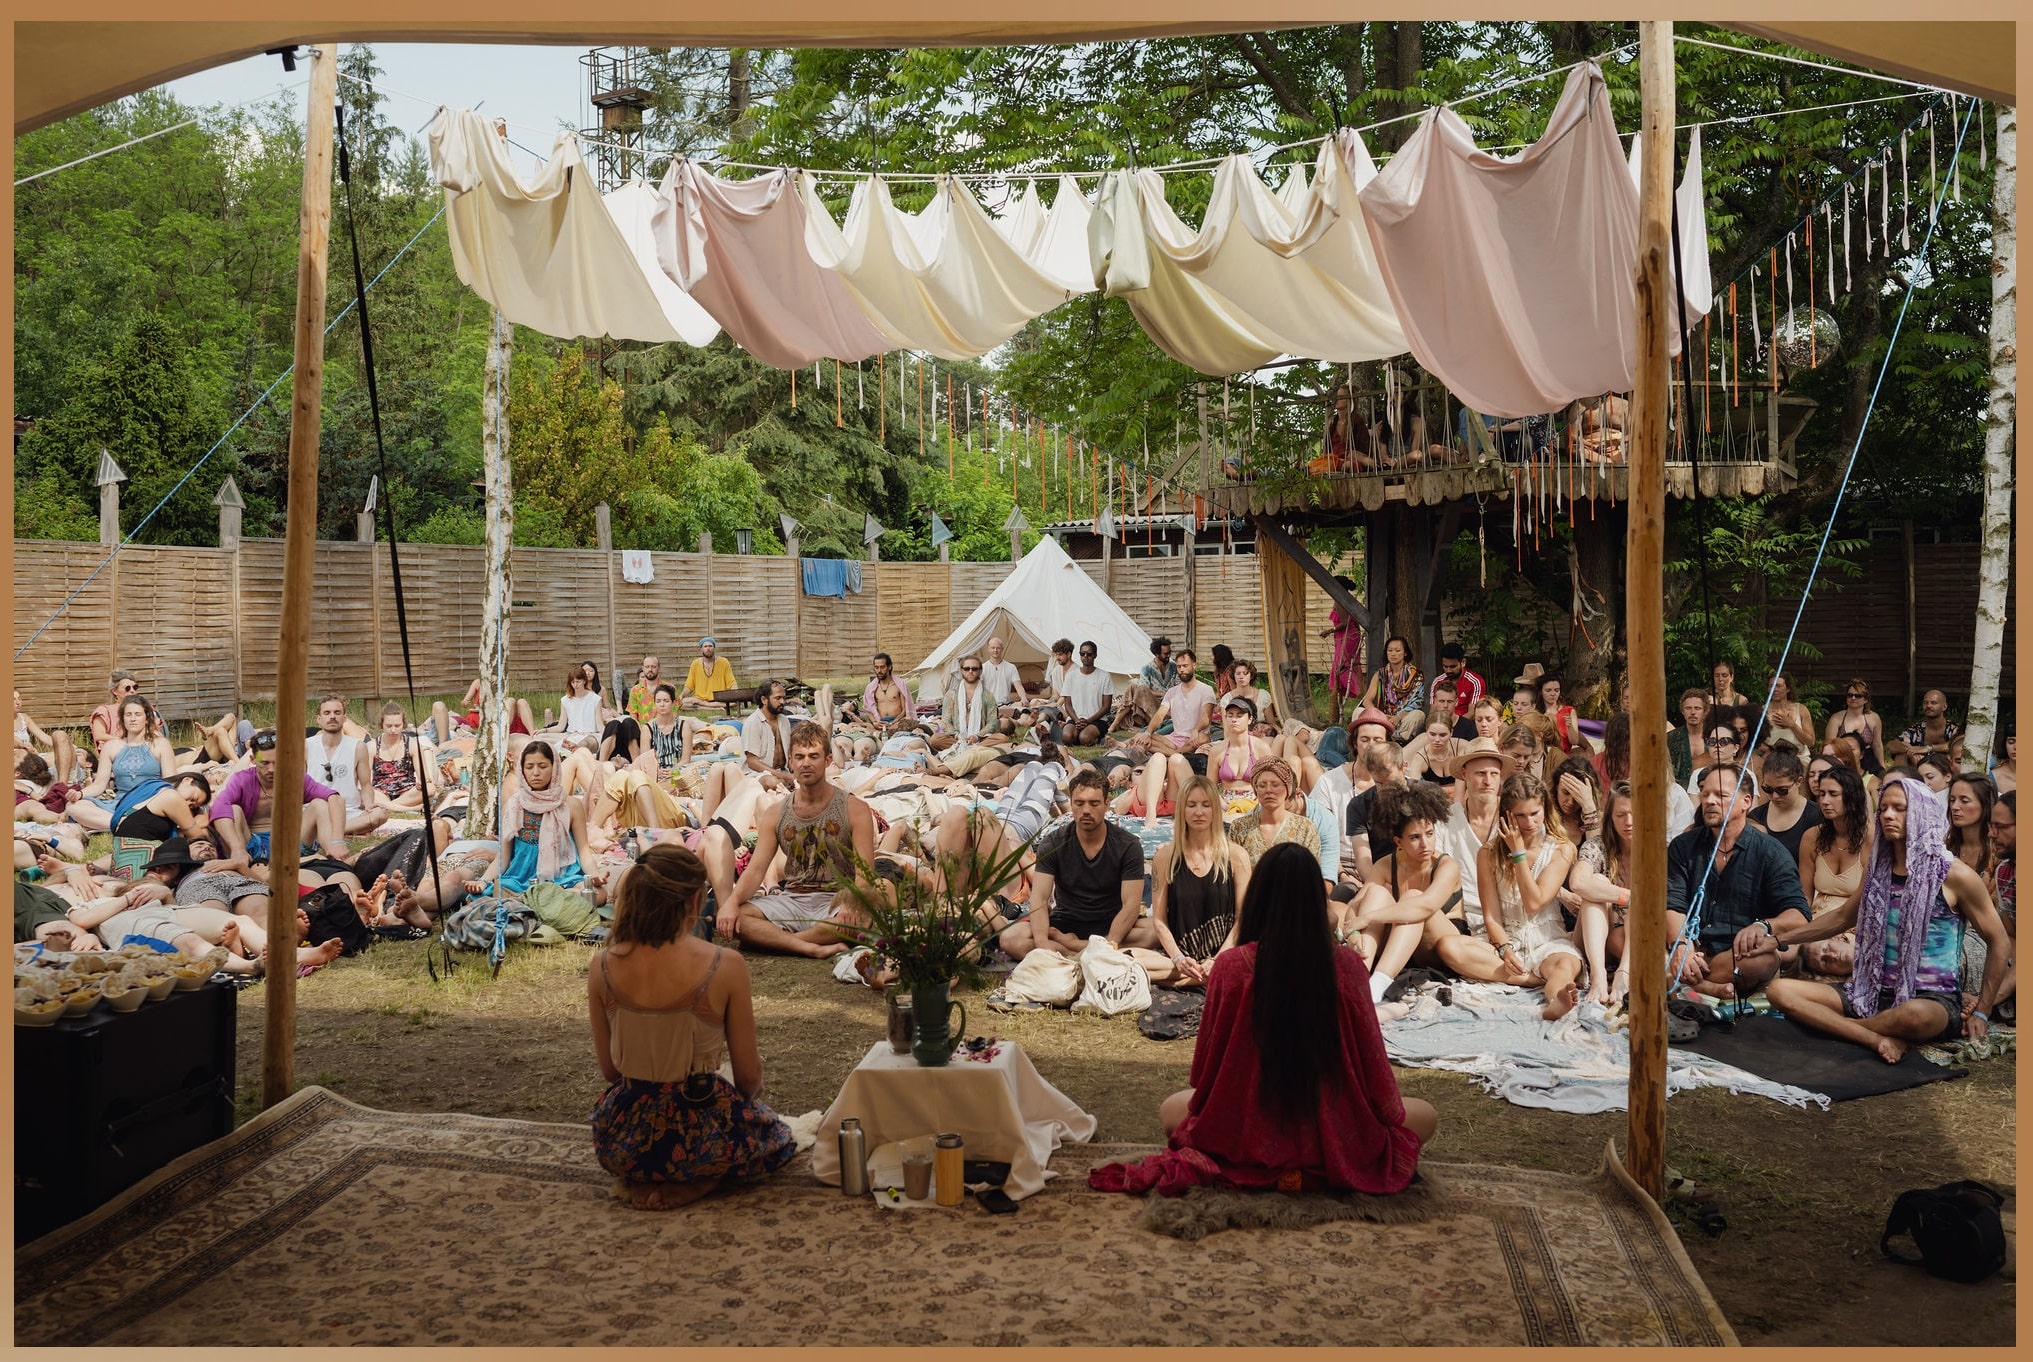 Attendees at the Pura Vida Festival Retreat in Germany, sitting outdoors during a workshop focused on holistic wellness and community building.